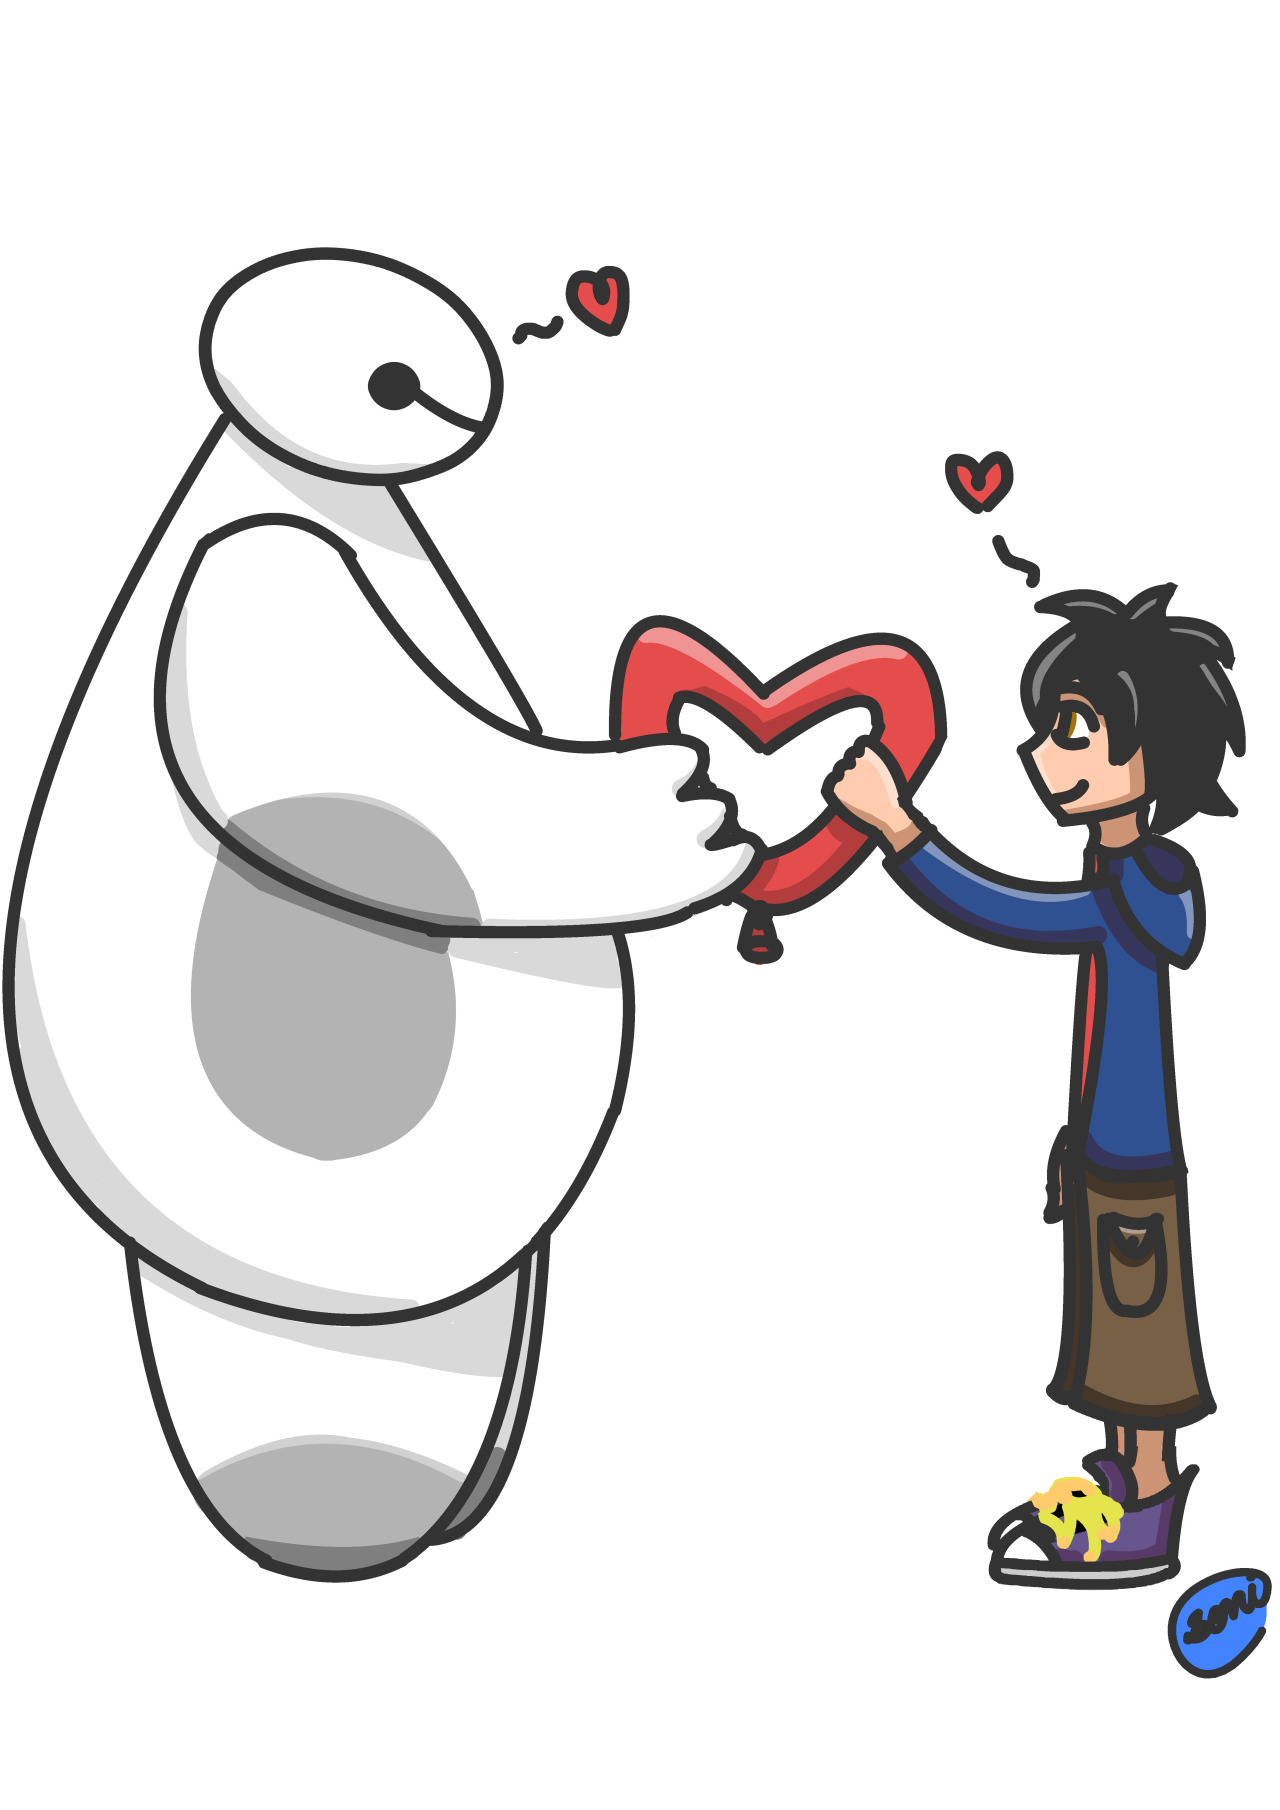 Submitted be @ellie-rush
“Digital art for the Big Hero 6 Valentine’s Contest~ :3”